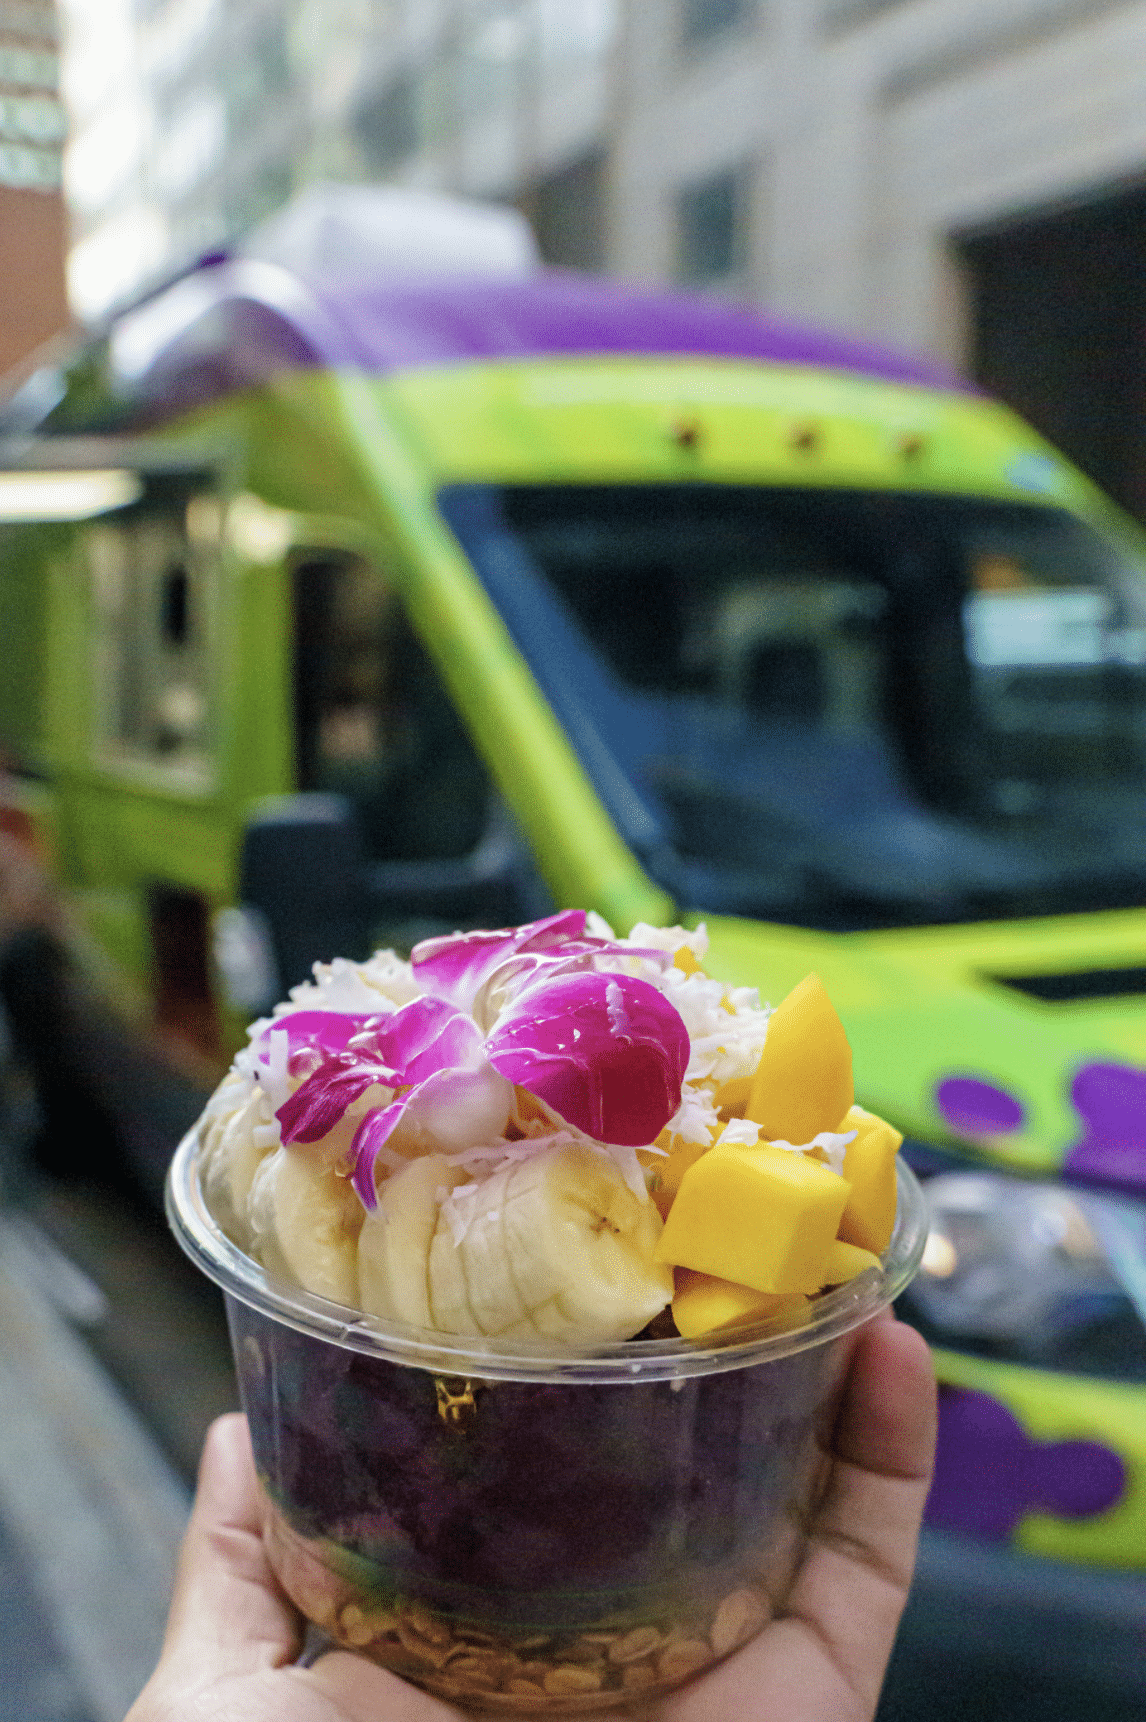 Acai Bowl topped with mango, banana, and coconut flakes, in front of food truck